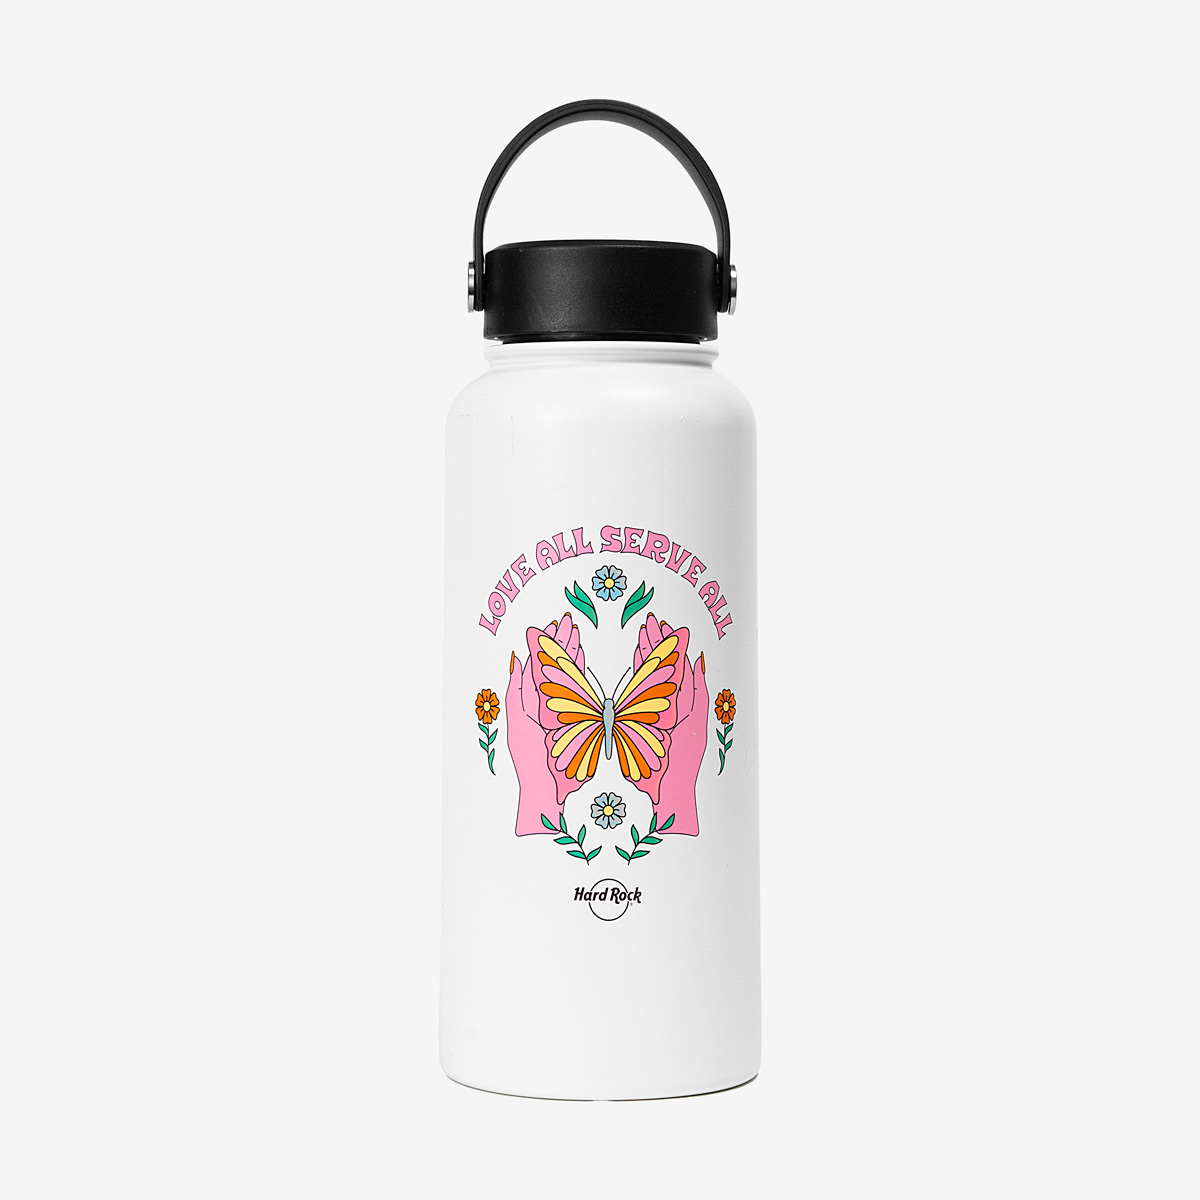 Hard Rock Music Festival Love All Serve All Water Bottle in White 32oz image number 1